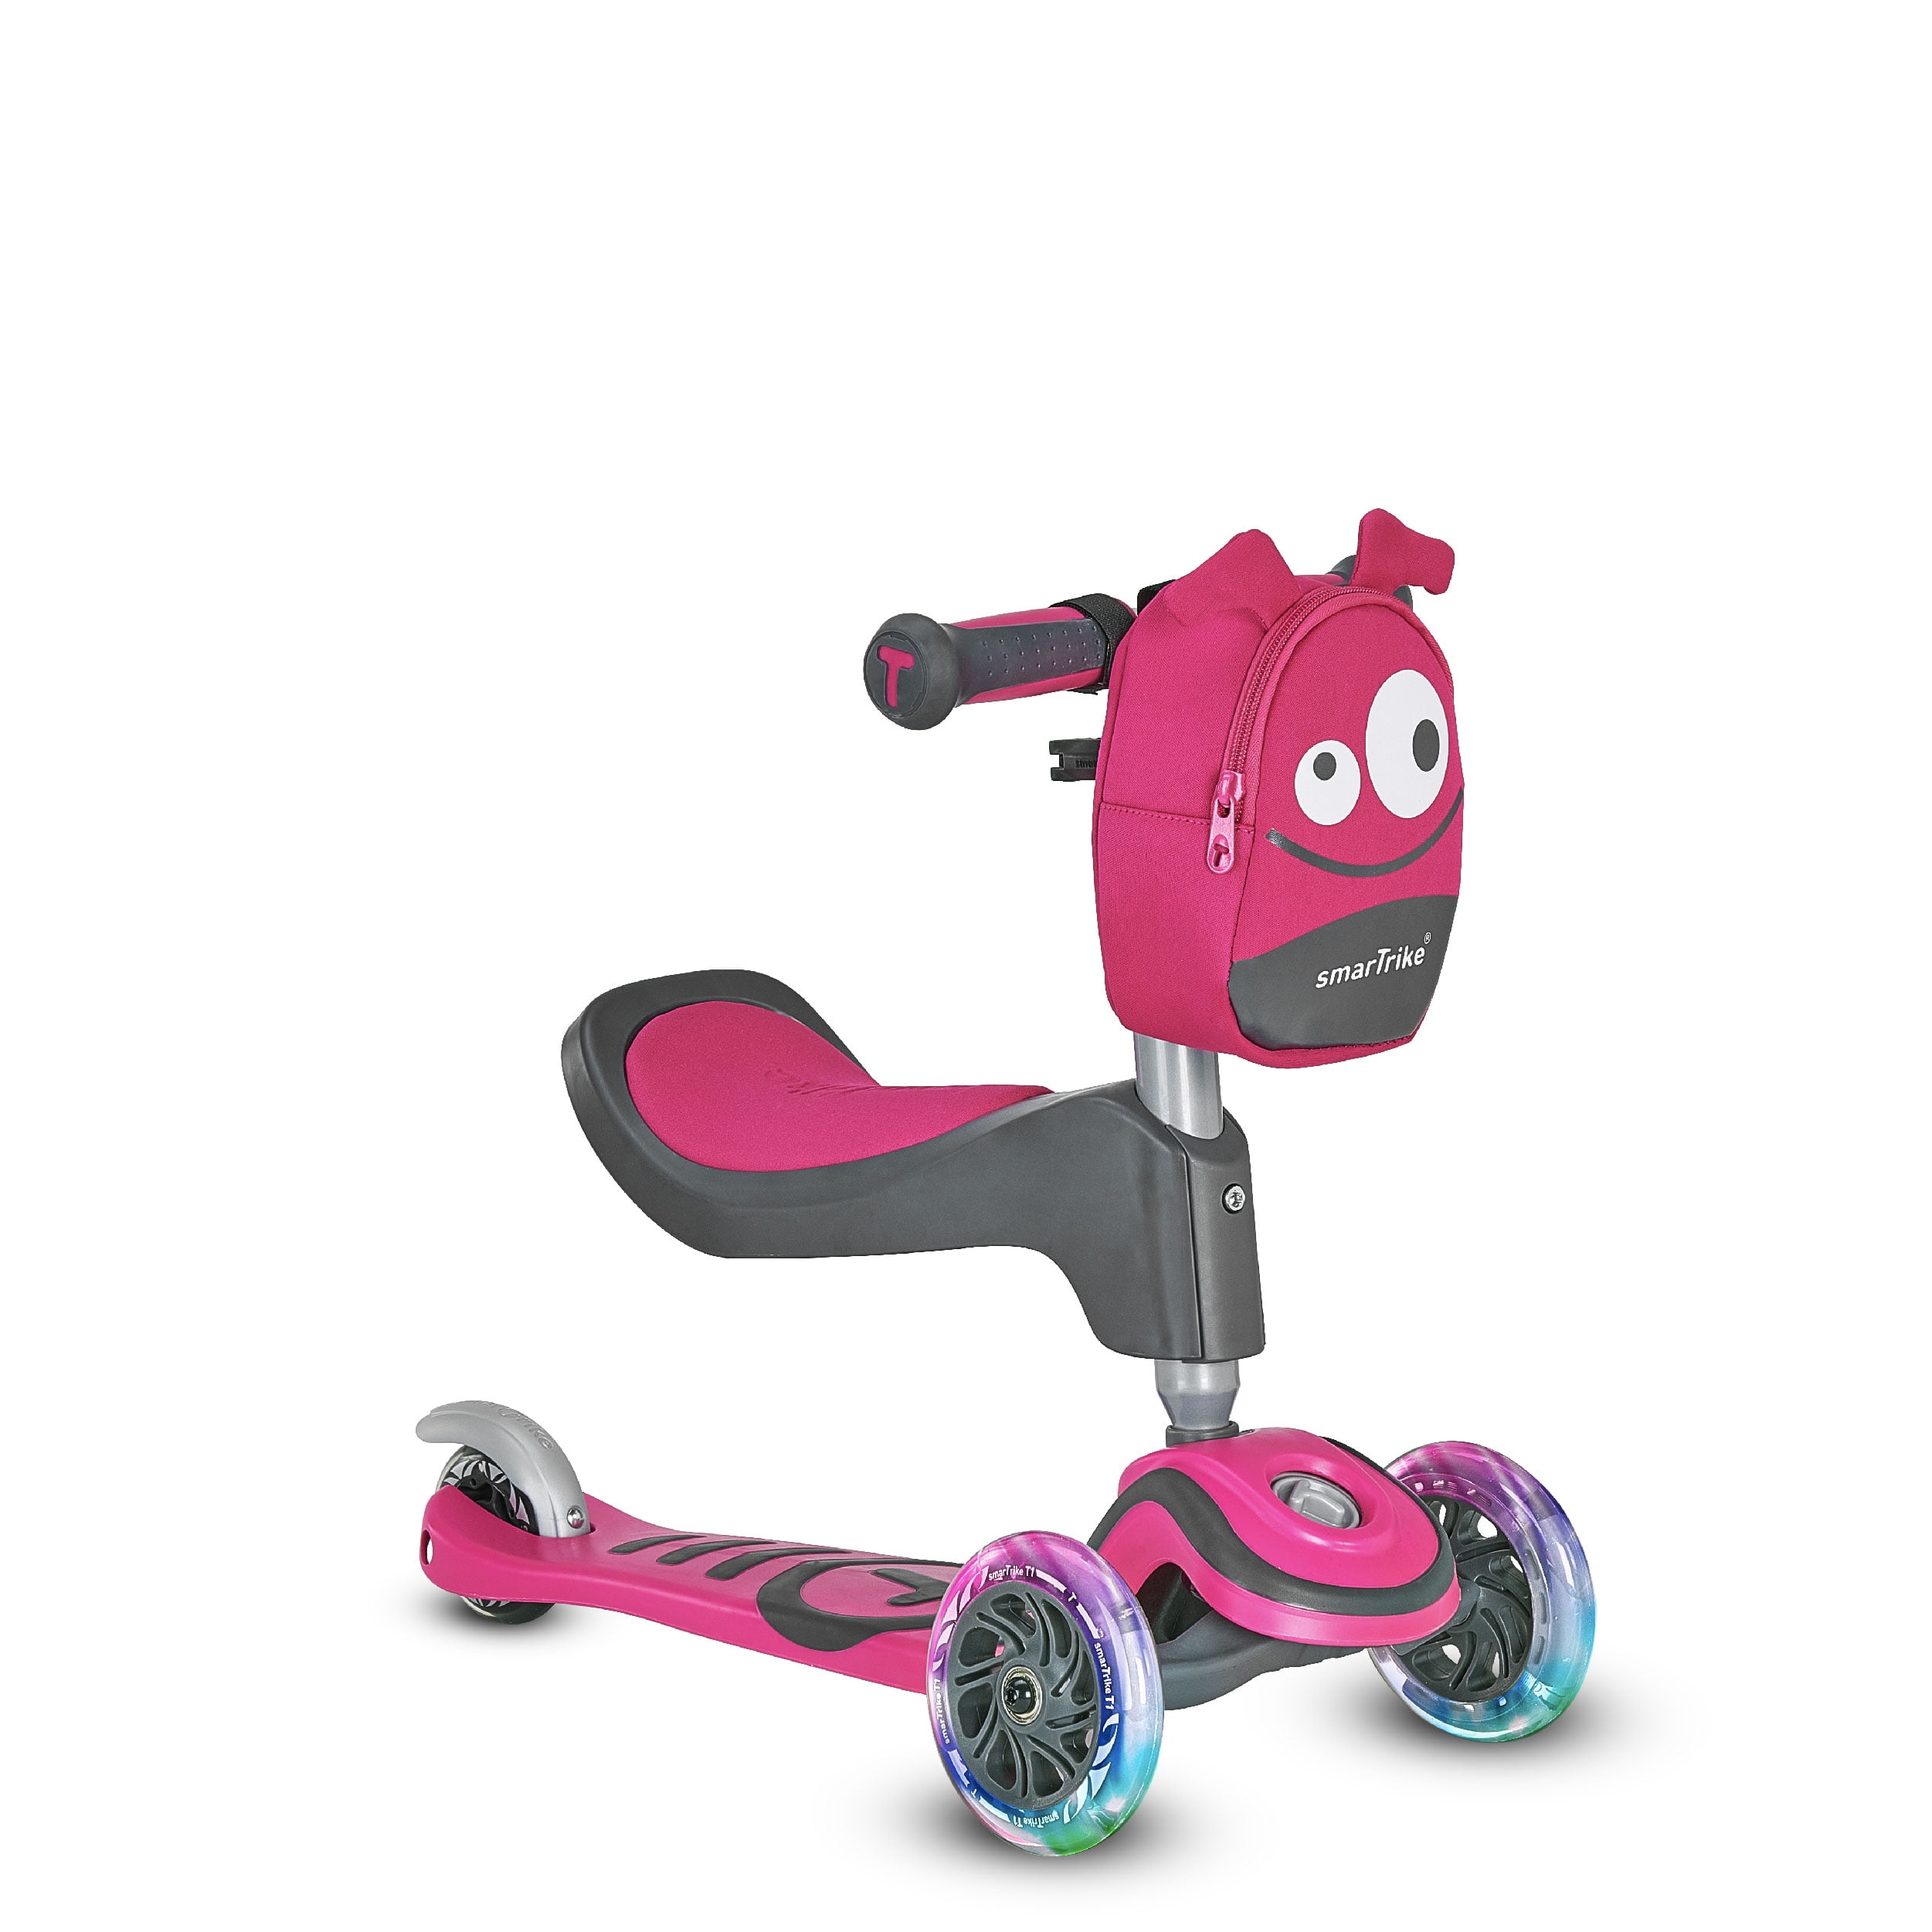 smarTrike T1 3-in-1 Toddler Scooter with Safety Included, 15M+, Blue - Walmart.com